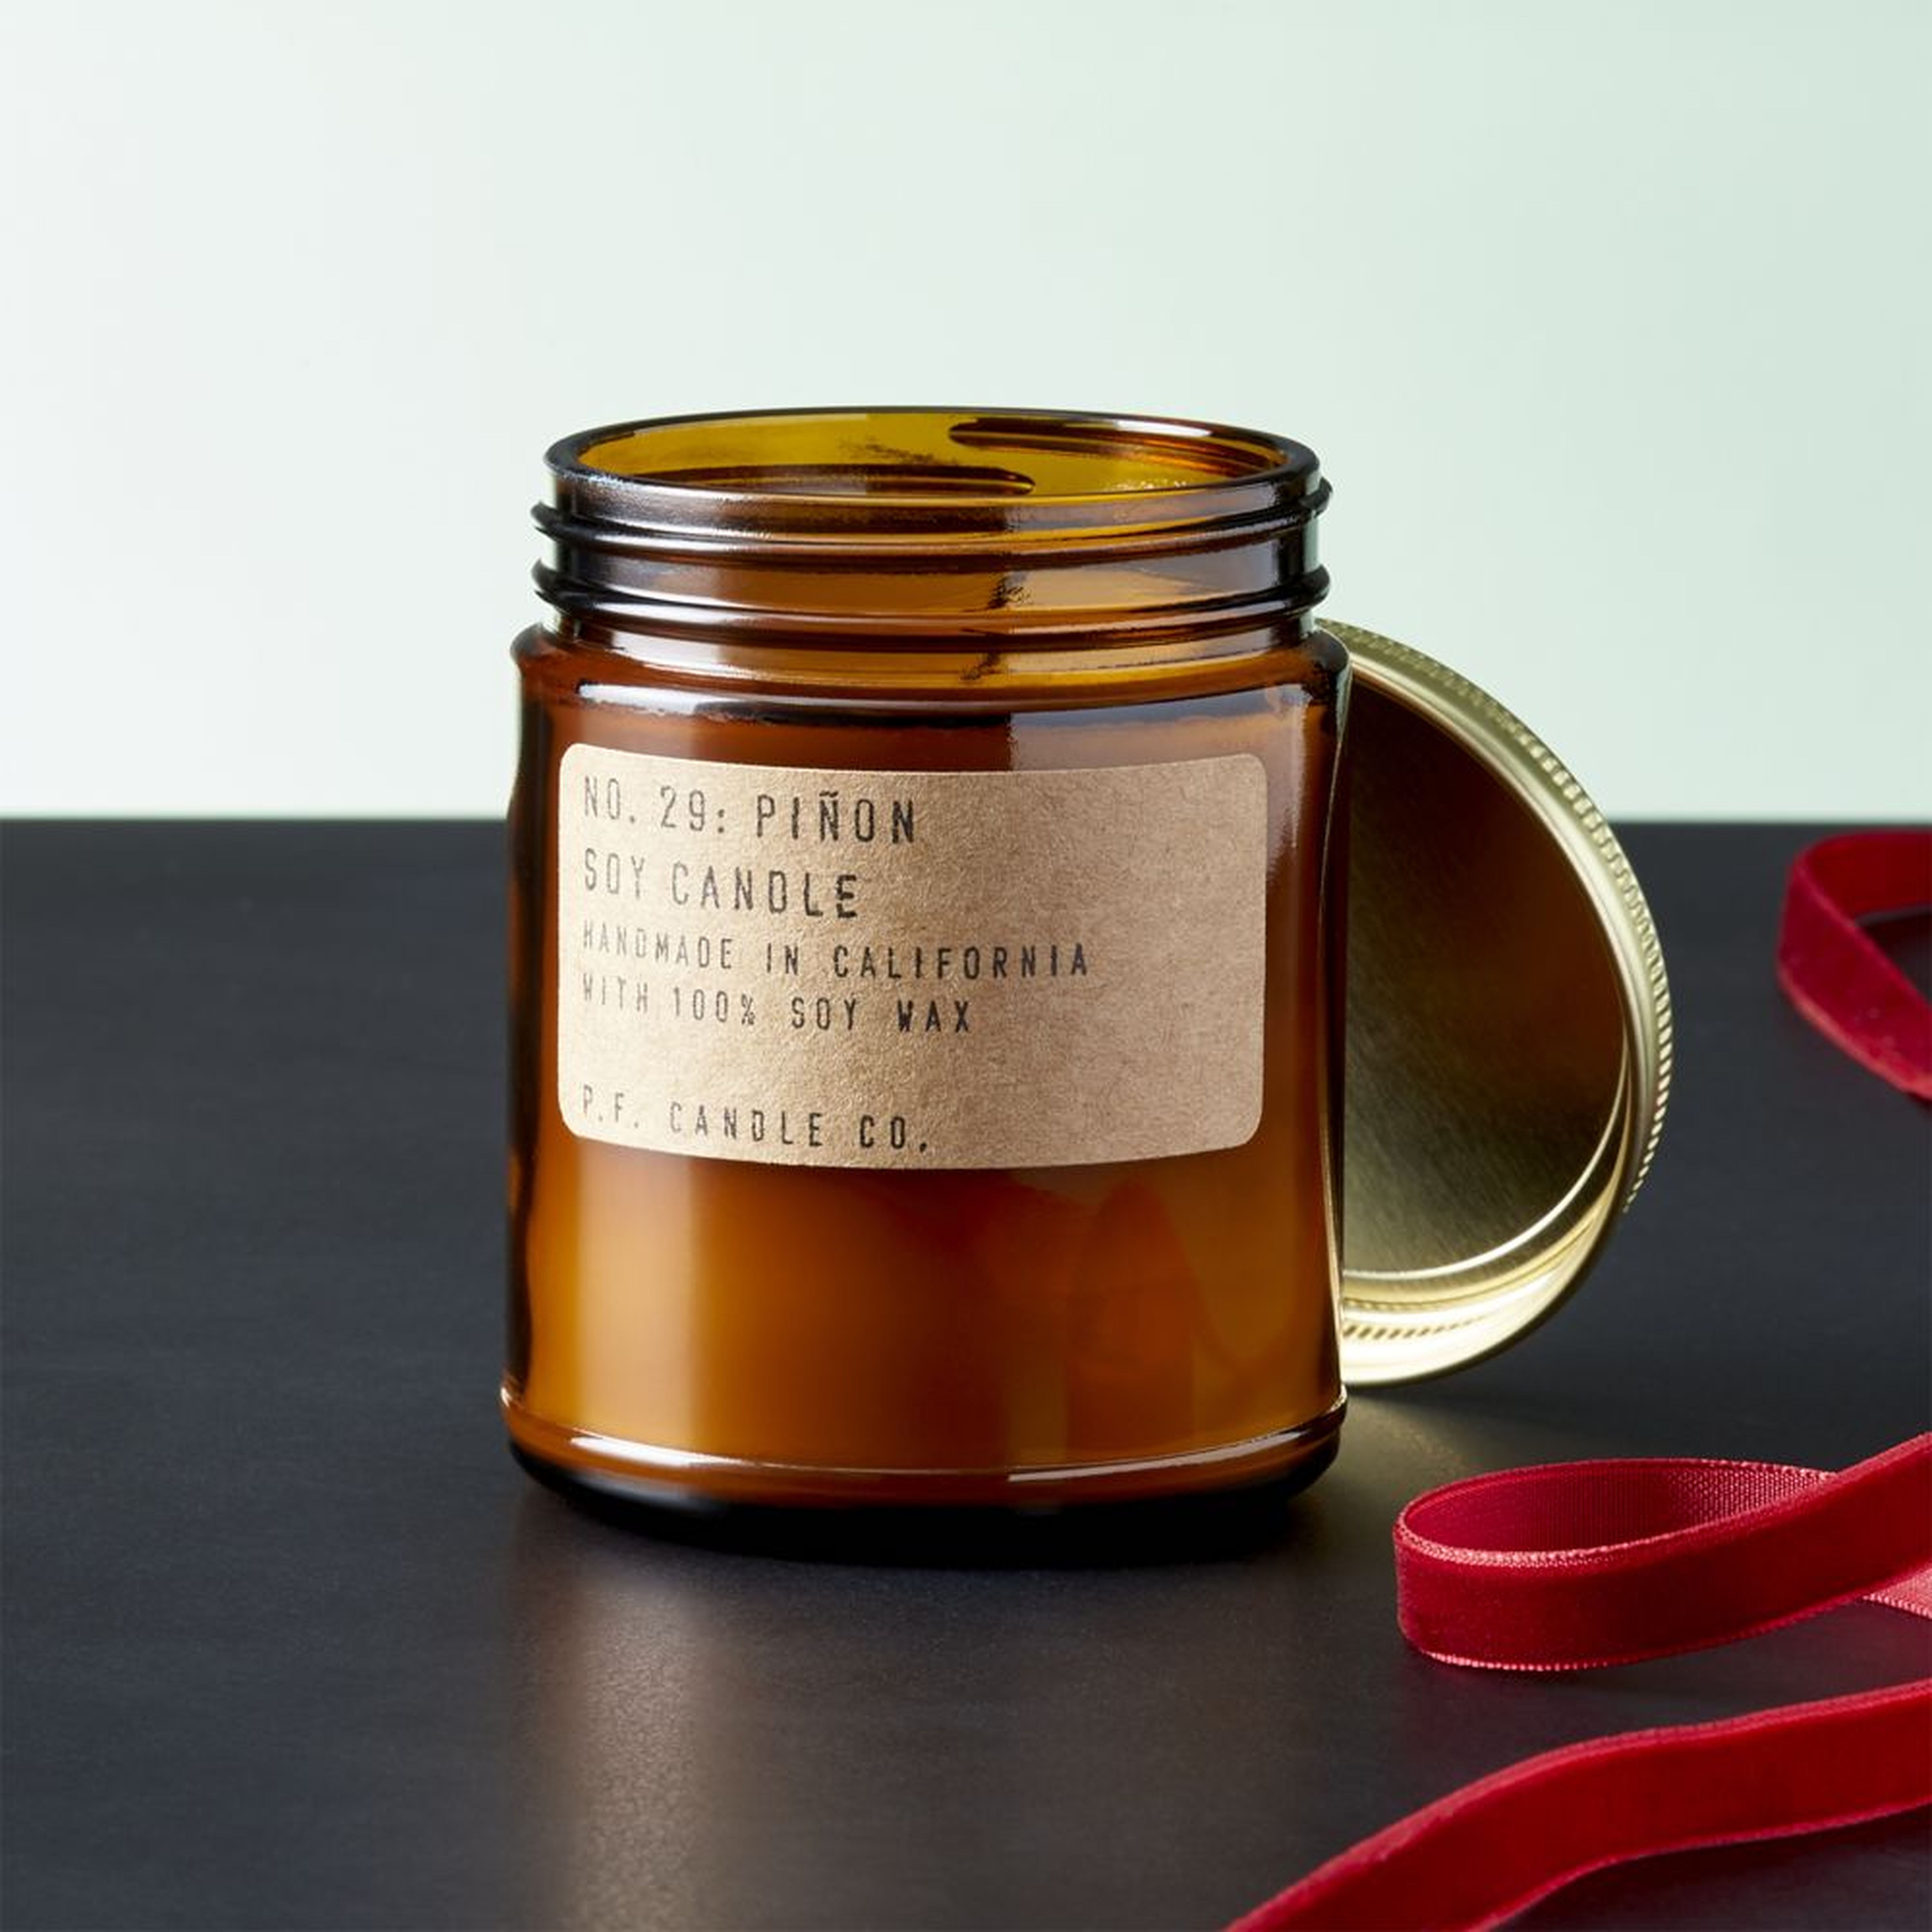 Pinon Soy Candle - CB2